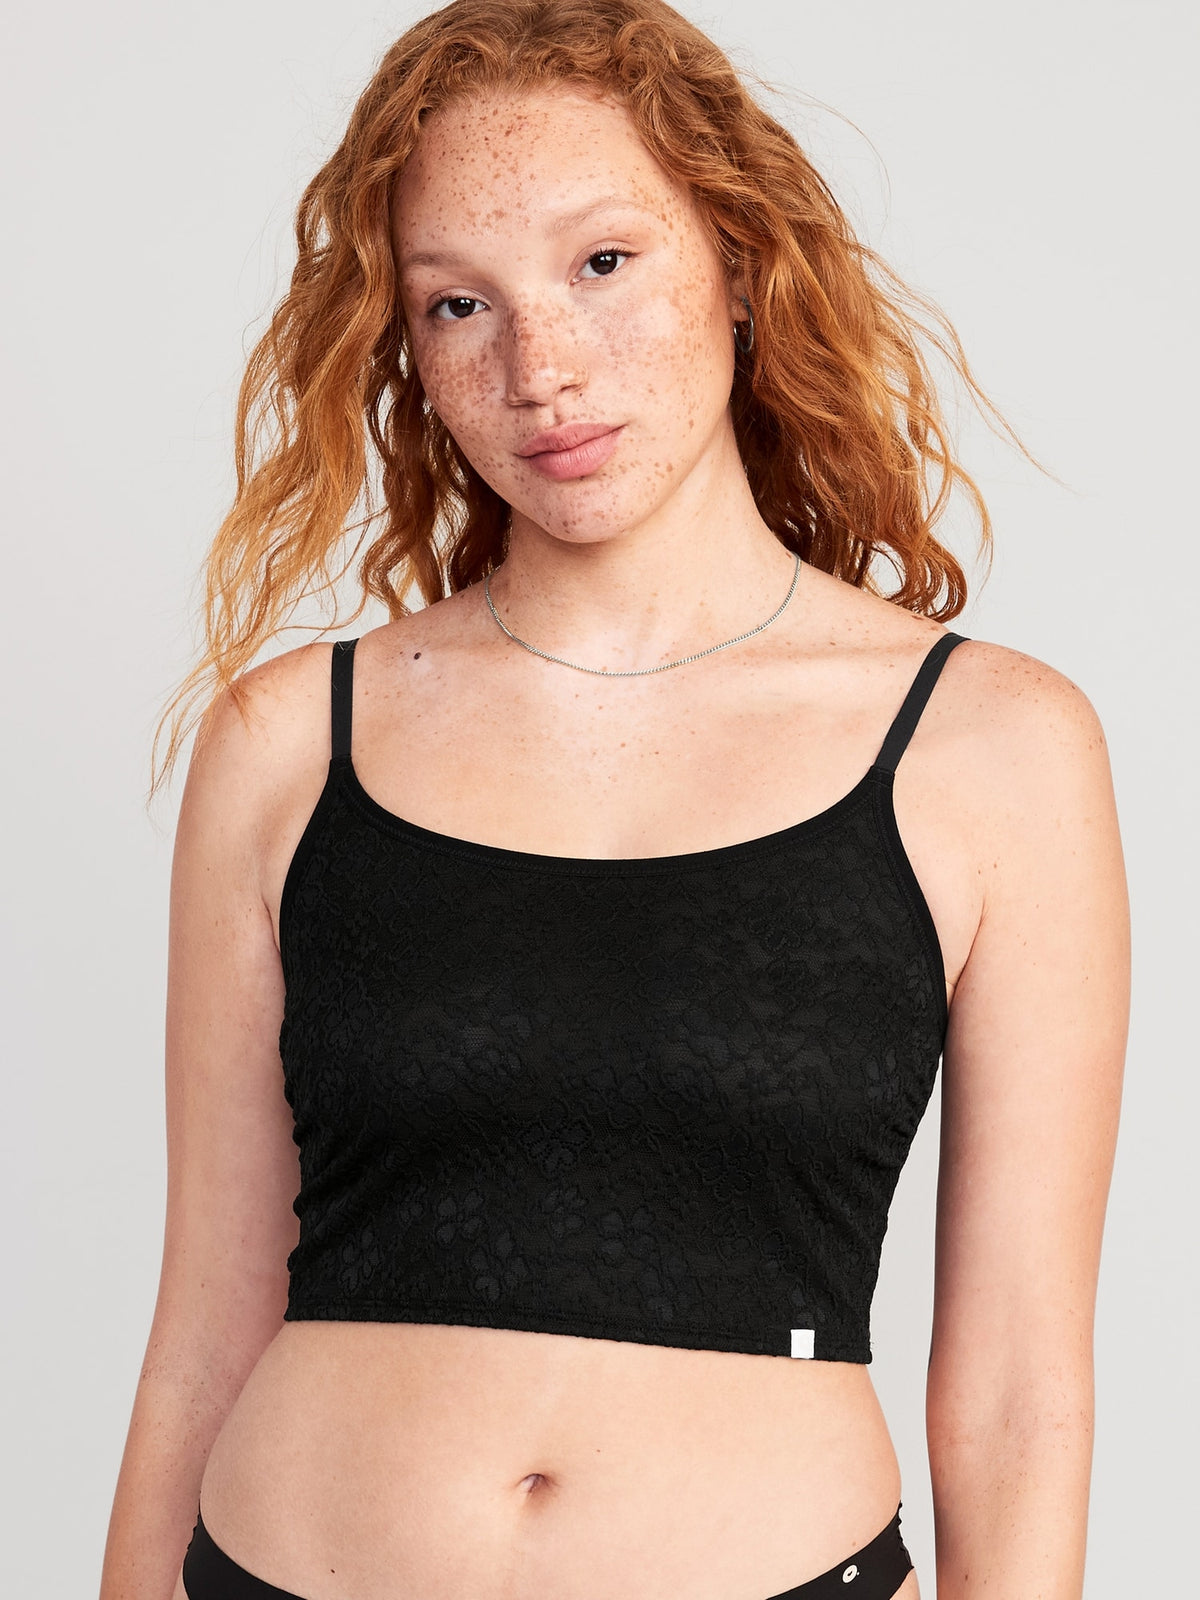 Lace Bralette Top for Women - Old Navy Philippines